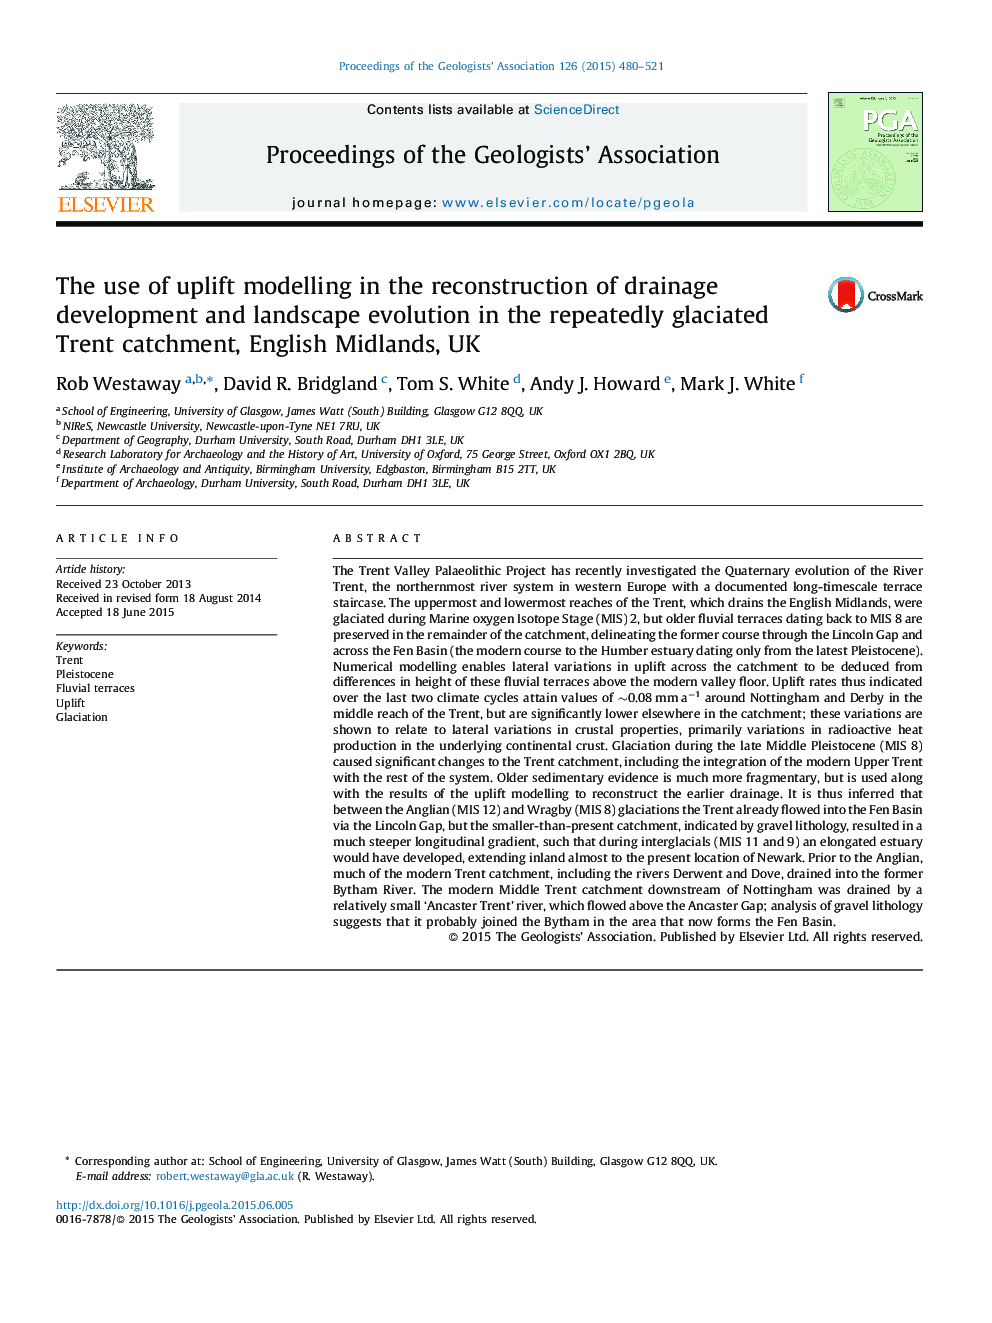 The use of uplift modelling in the reconstruction of drainage development and landscape evolution in the repeatedly glaciated Trent catchment, English Midlands, UK